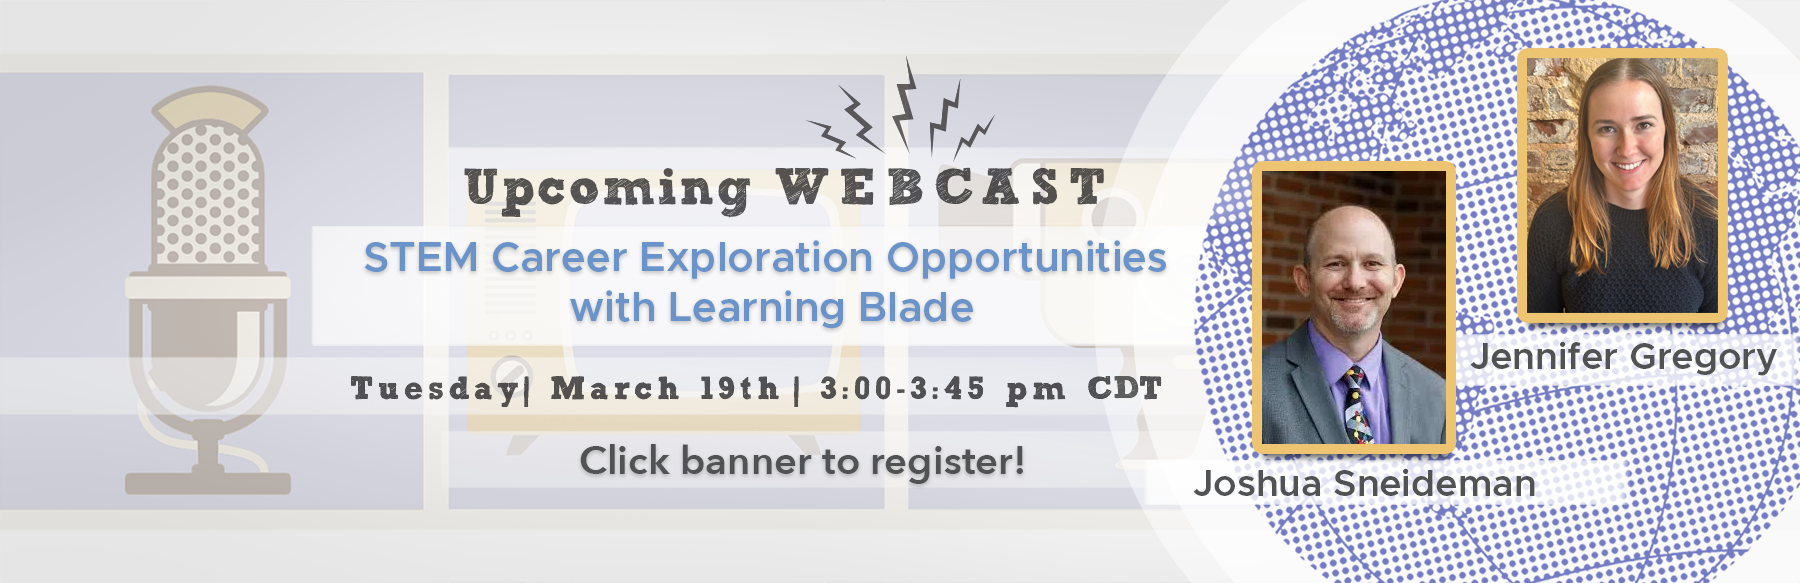 STEM Career Exploration Opportunities with Learning Blade banner image